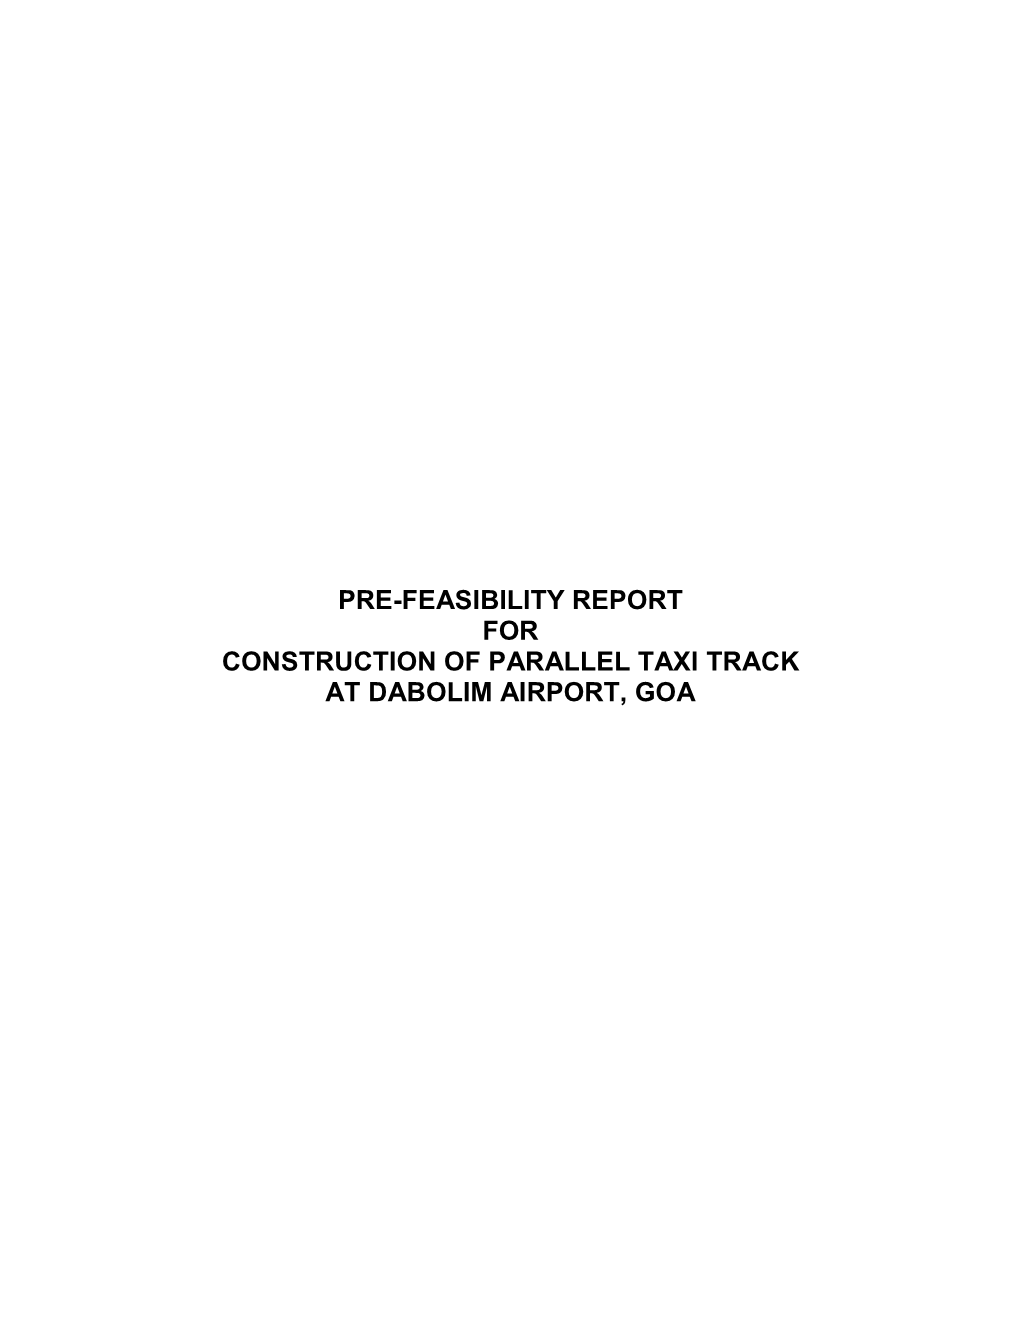 Pre-Feasibility Report for Construction of Parallel Taxi Track at Dabolim Airport, Goa